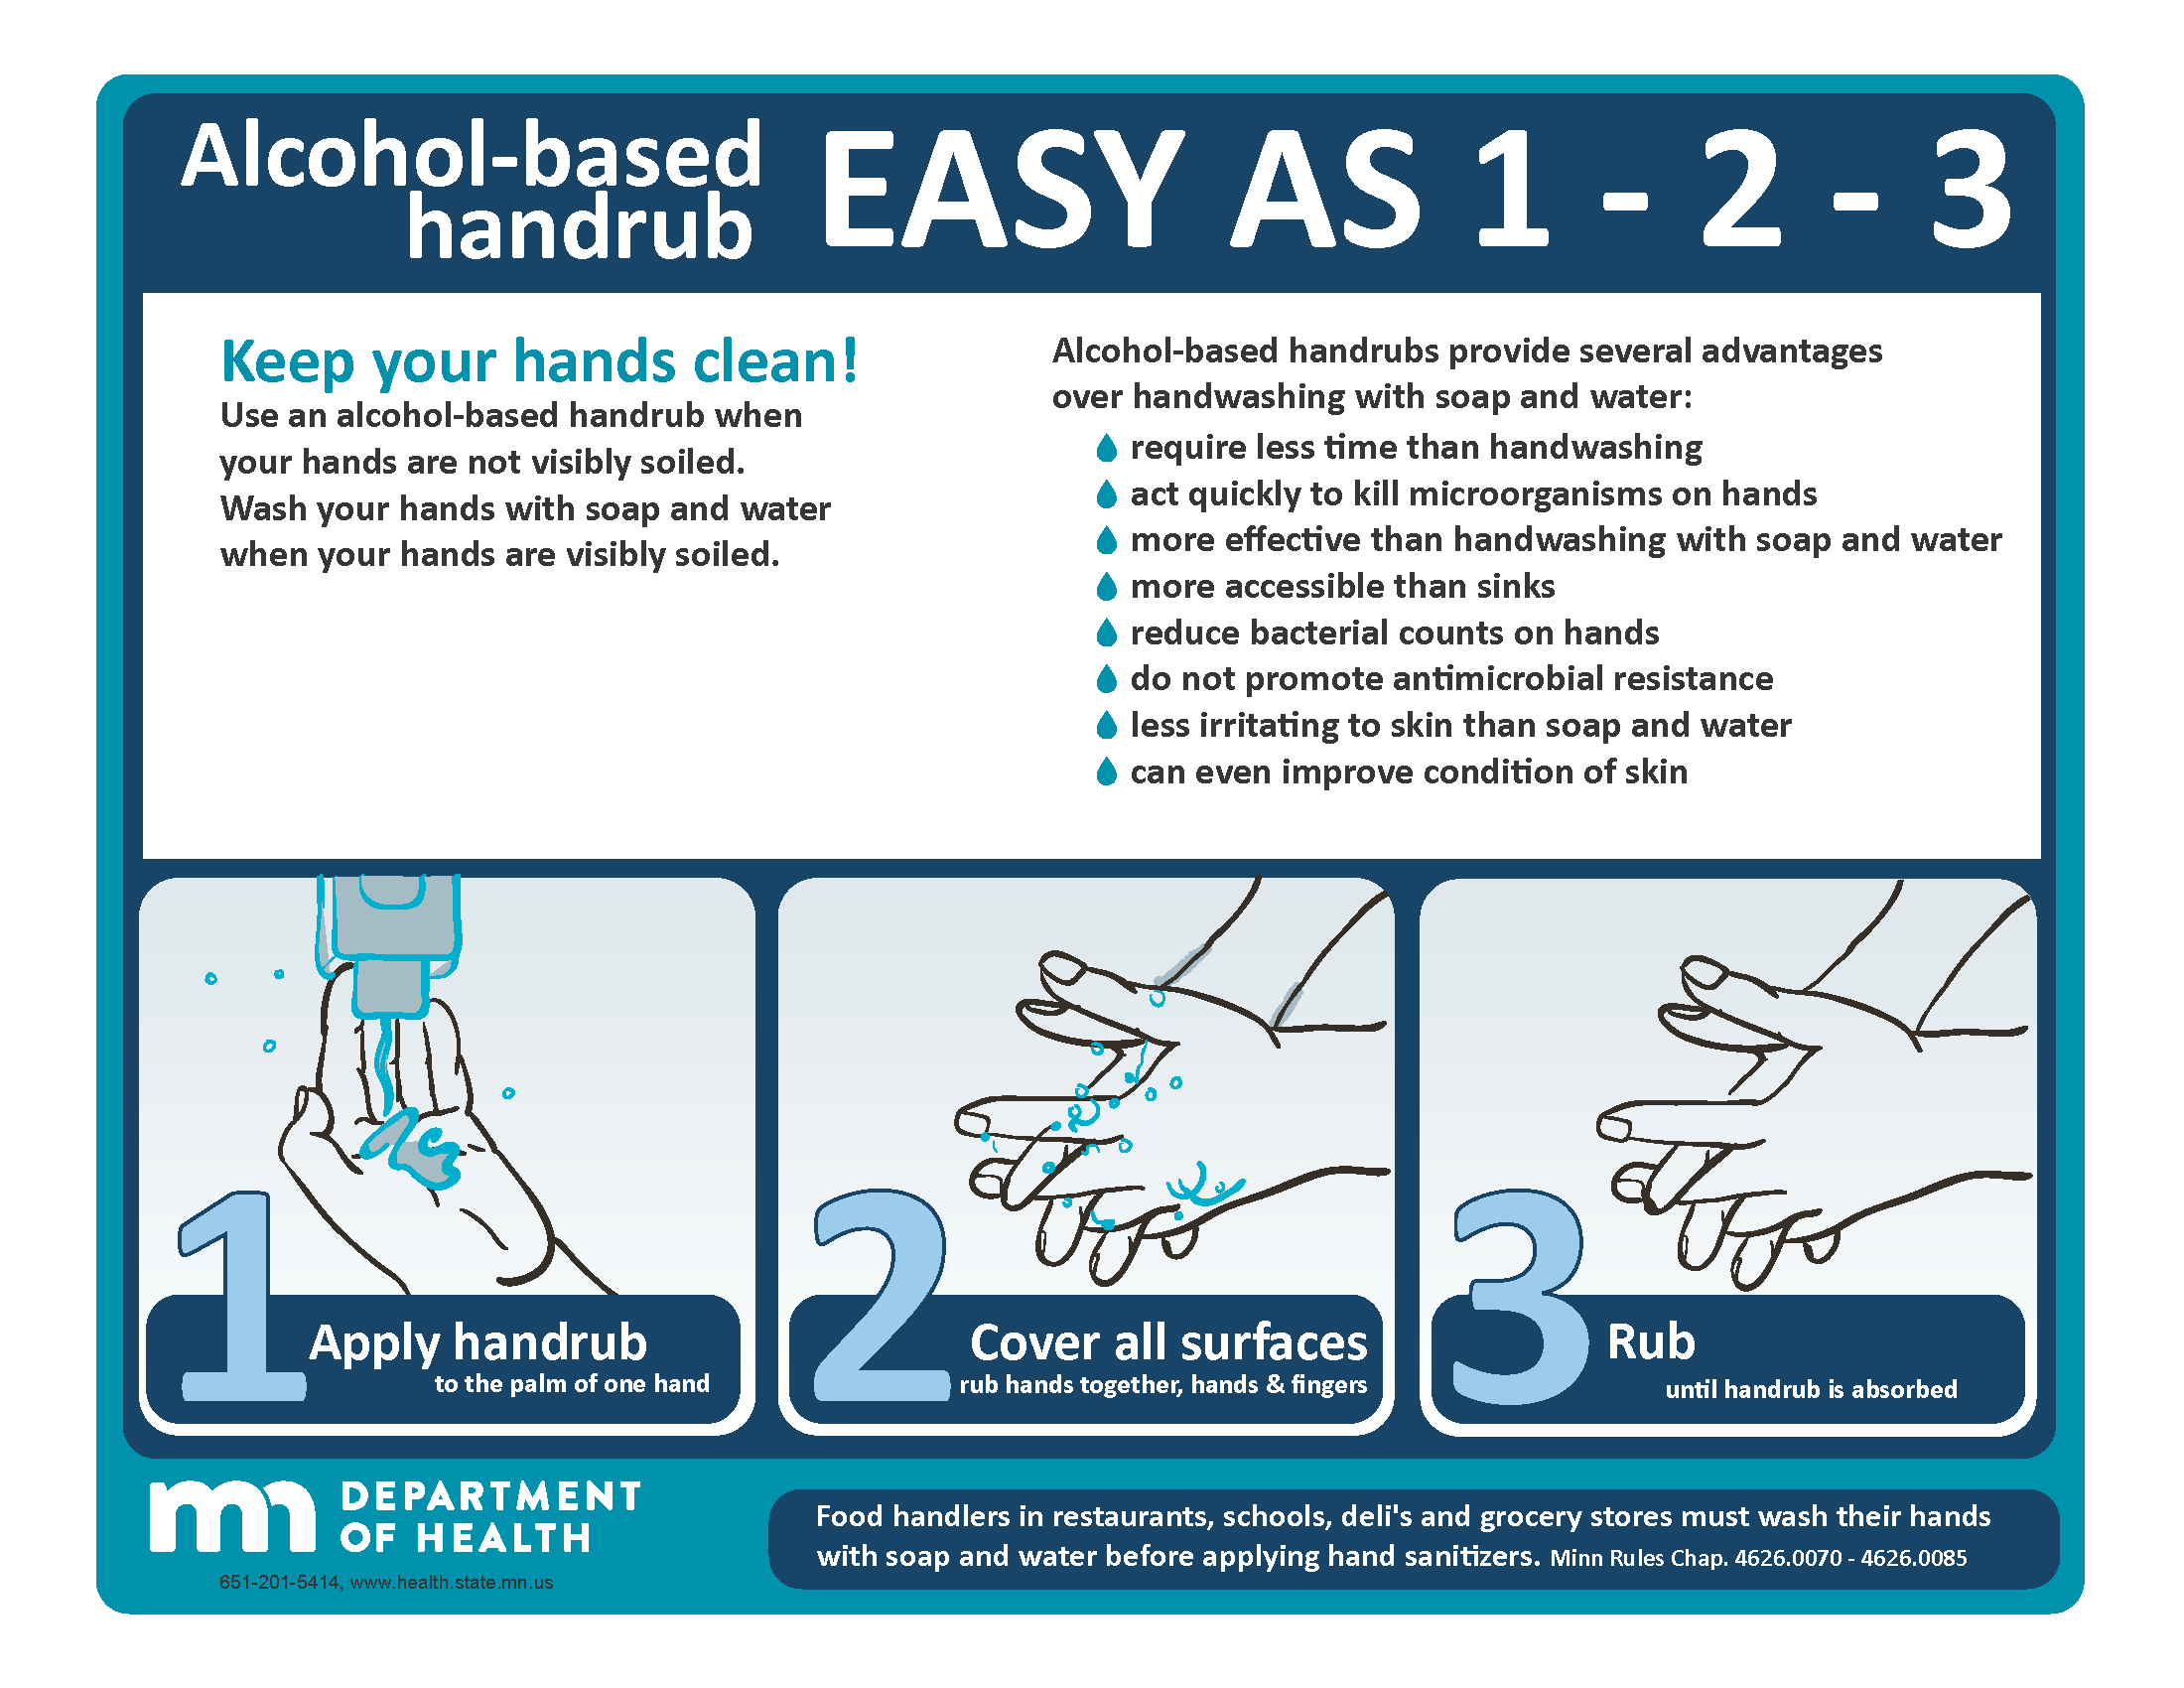 image of the alcohol hand rubs poster